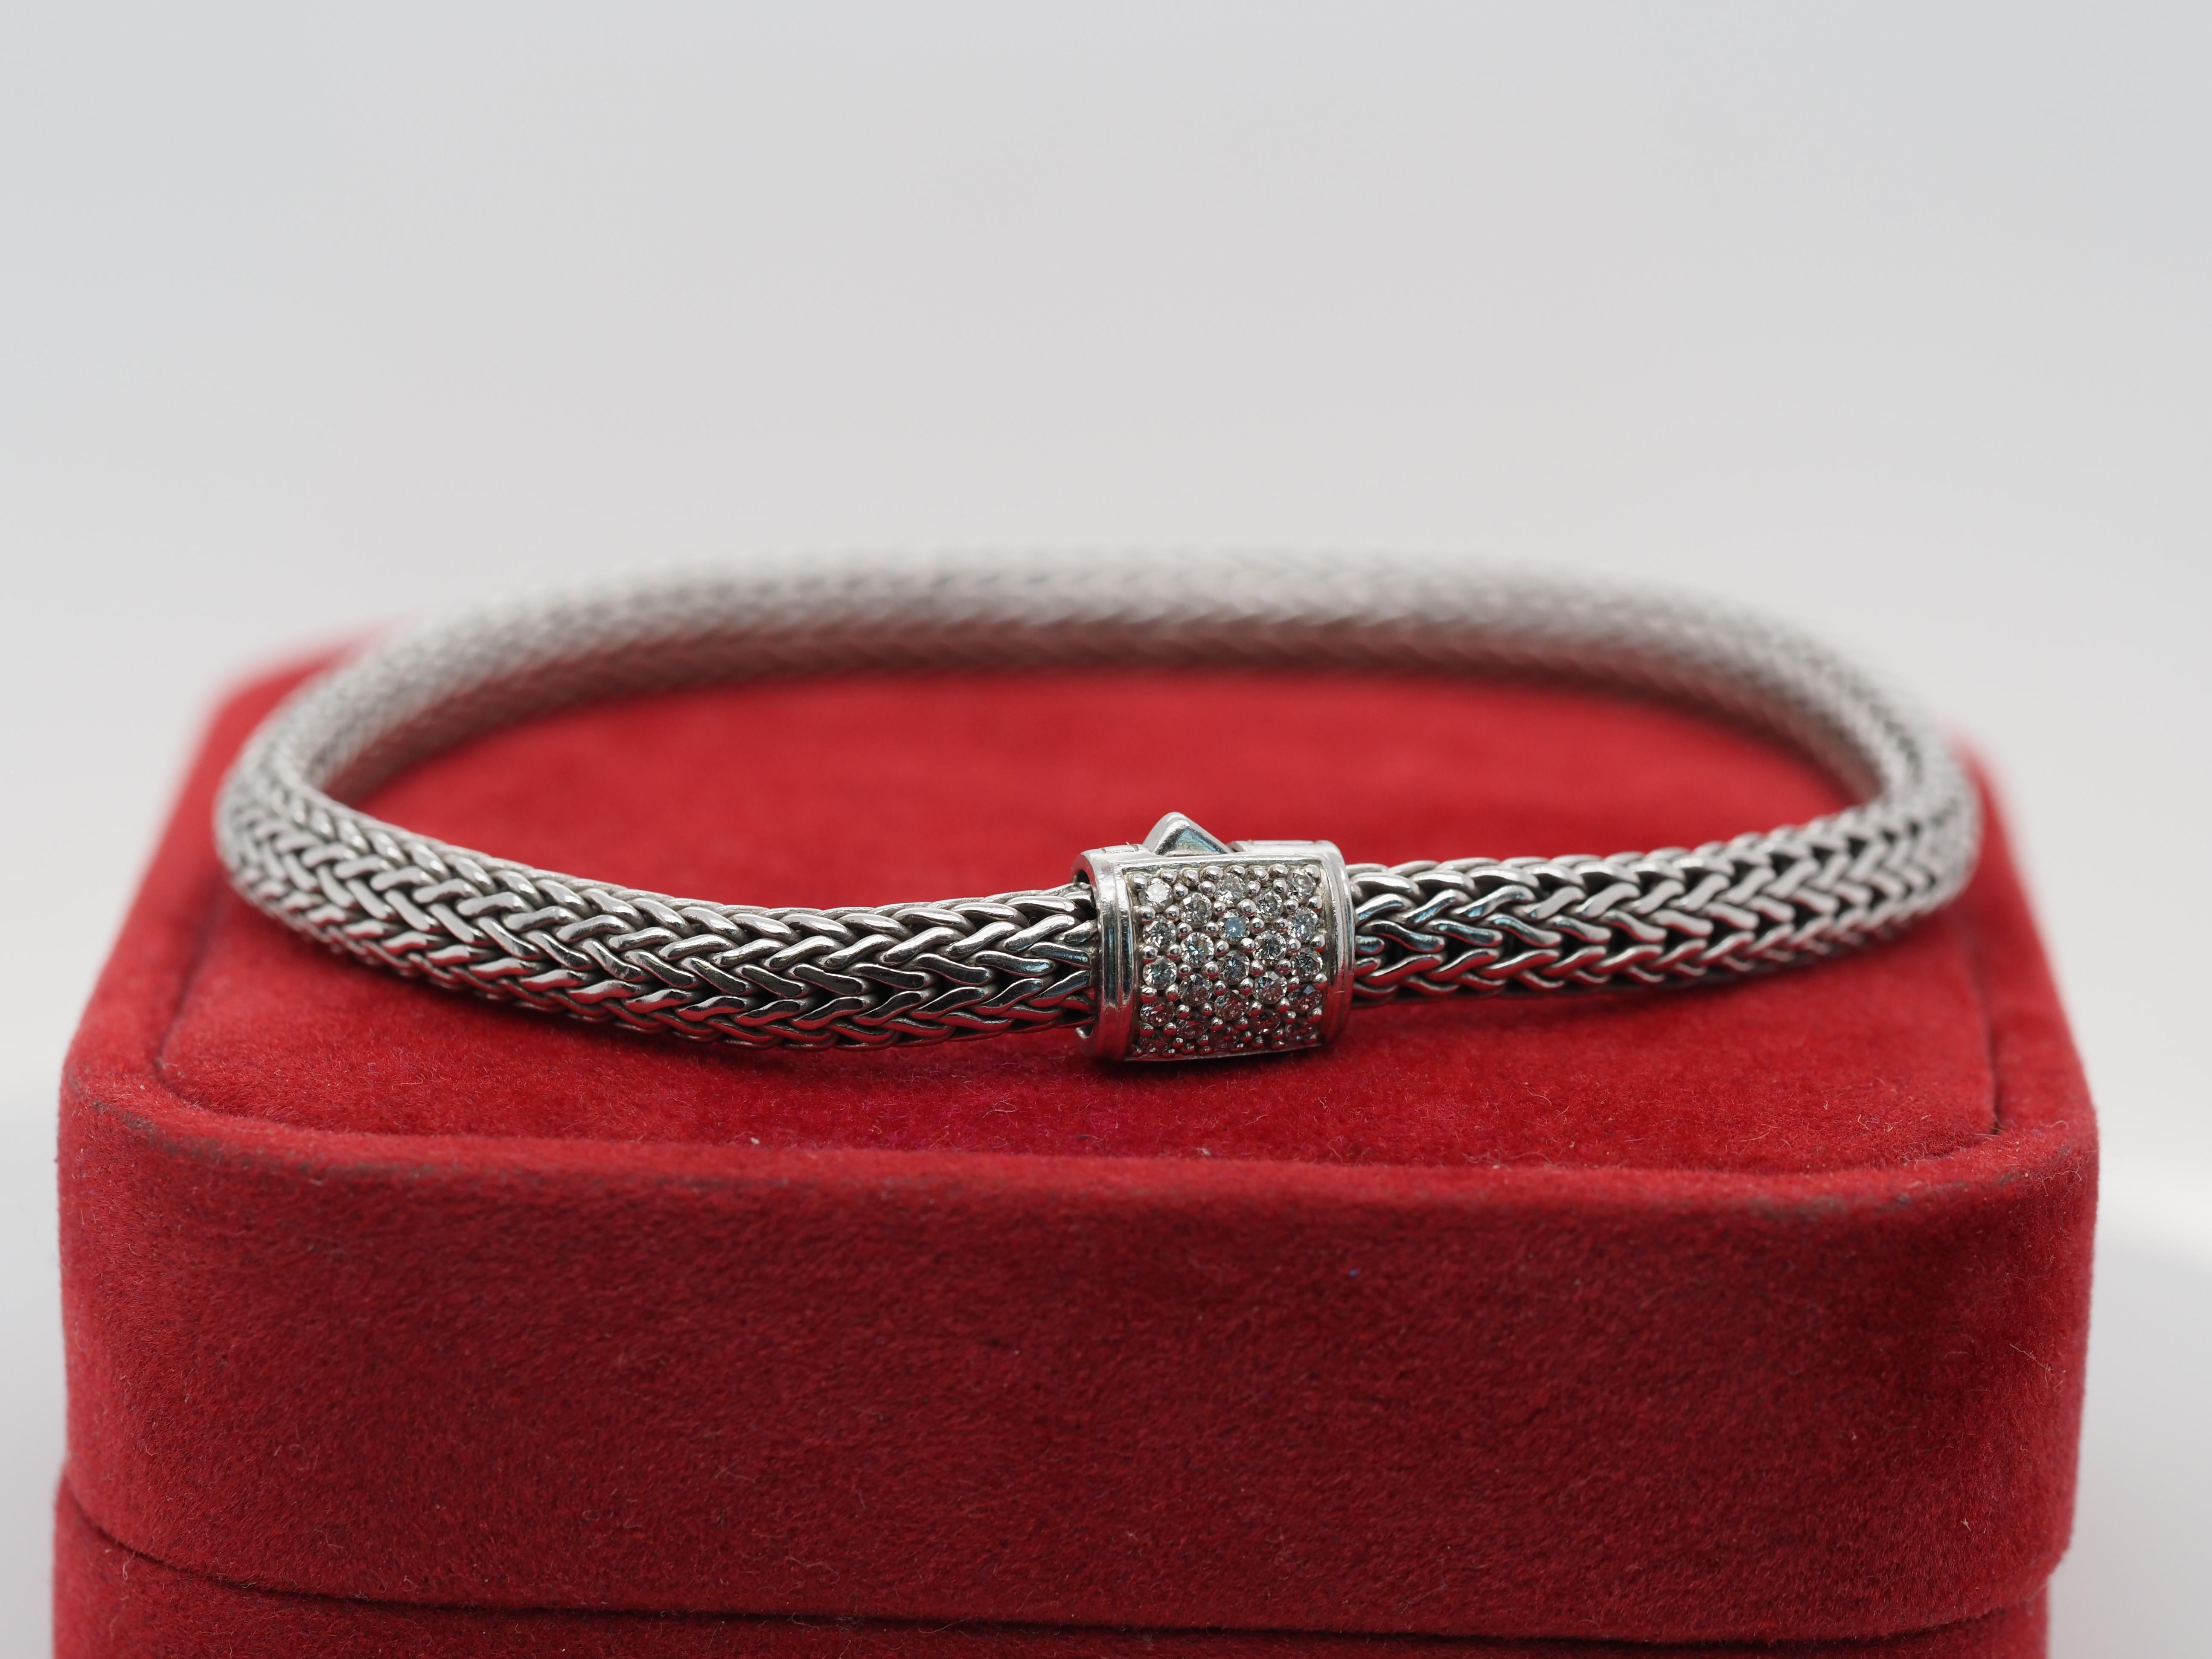 Item Details:
Metal Type: Sterling Silver [Hallmarked, and Tested]
Weight: 16.6 grams (All Items Total)
Stone Details:
Type: Diamonds, Natural.
Cut: Round
Weight: .25ct
Bracelet Length Measurement: 7.5 Inches
Condition: Excellent